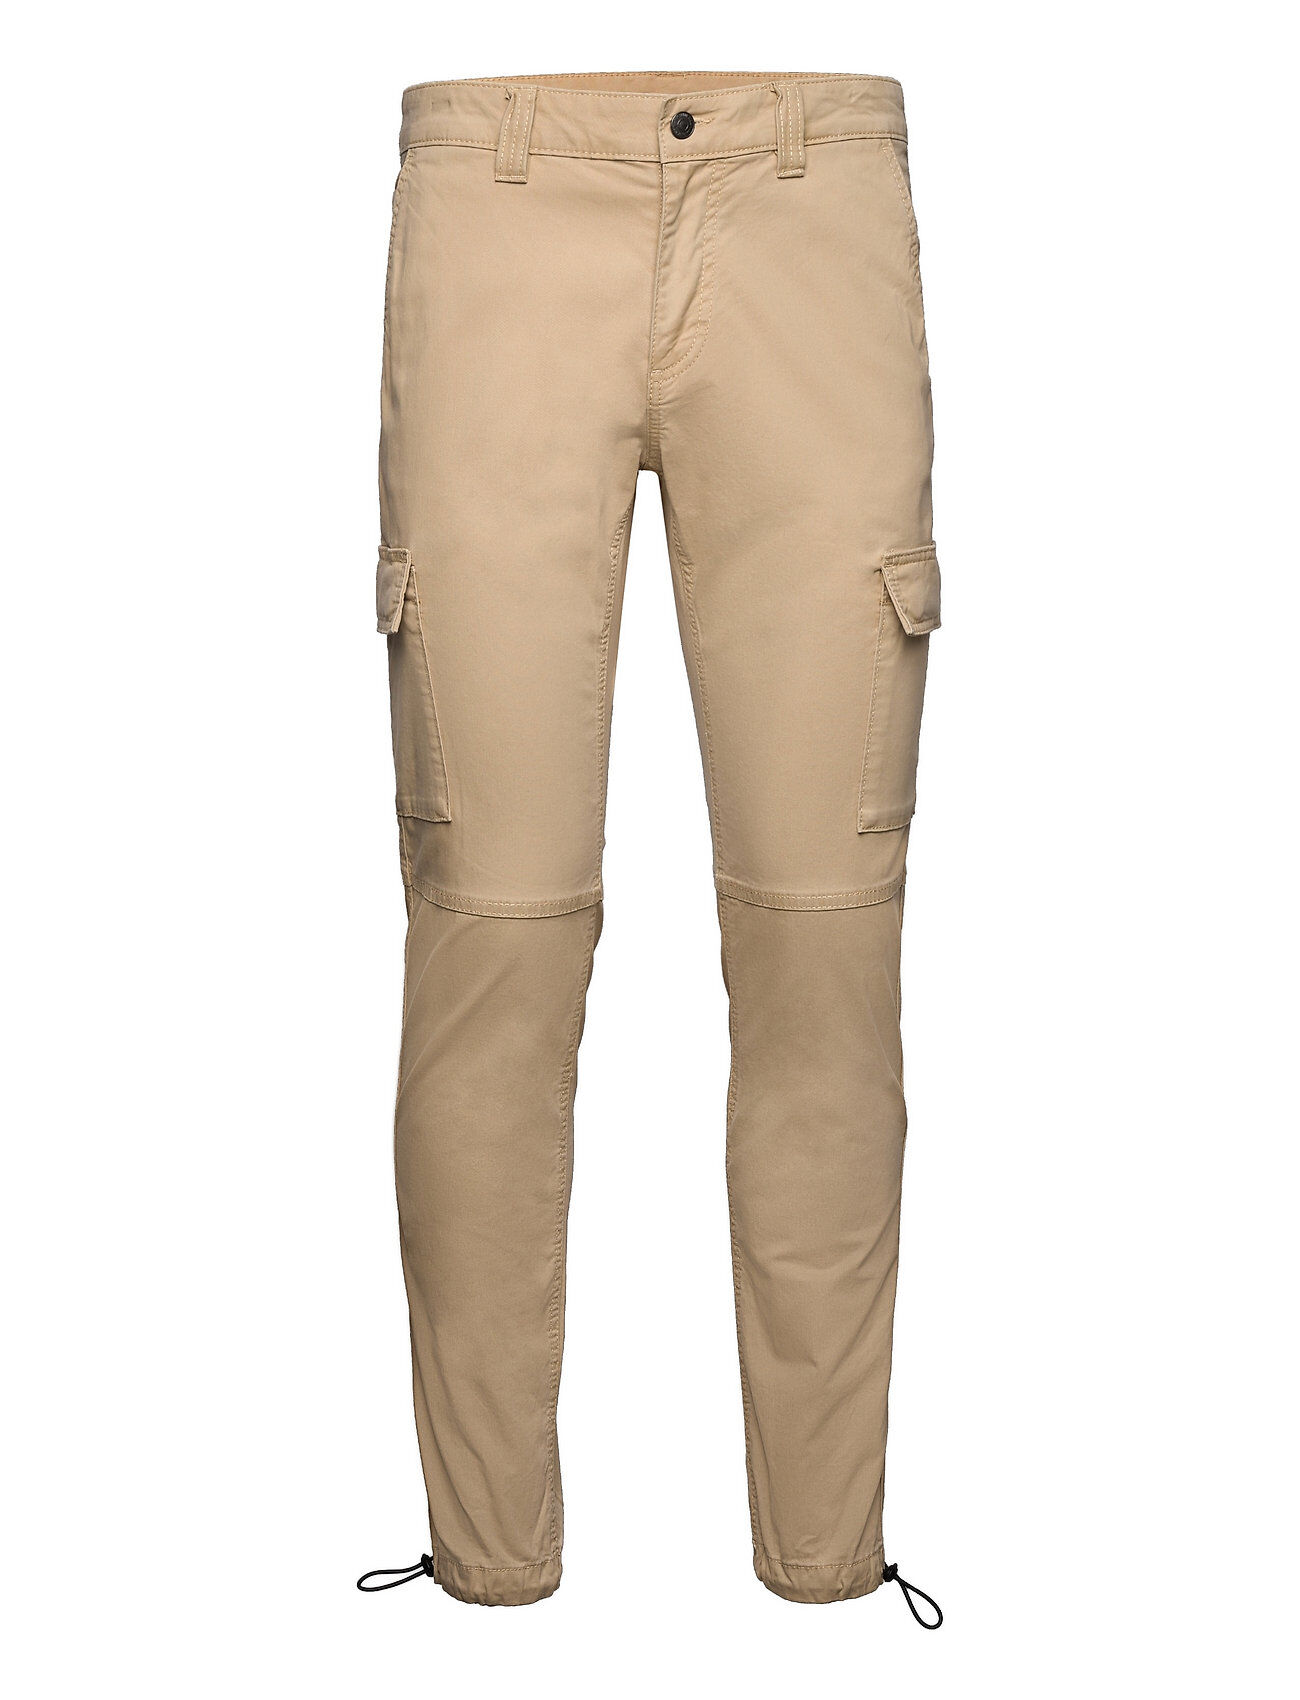 Tom Tailor Cargo Jogger Trousers Cargo Pants Beige Tom Tailor